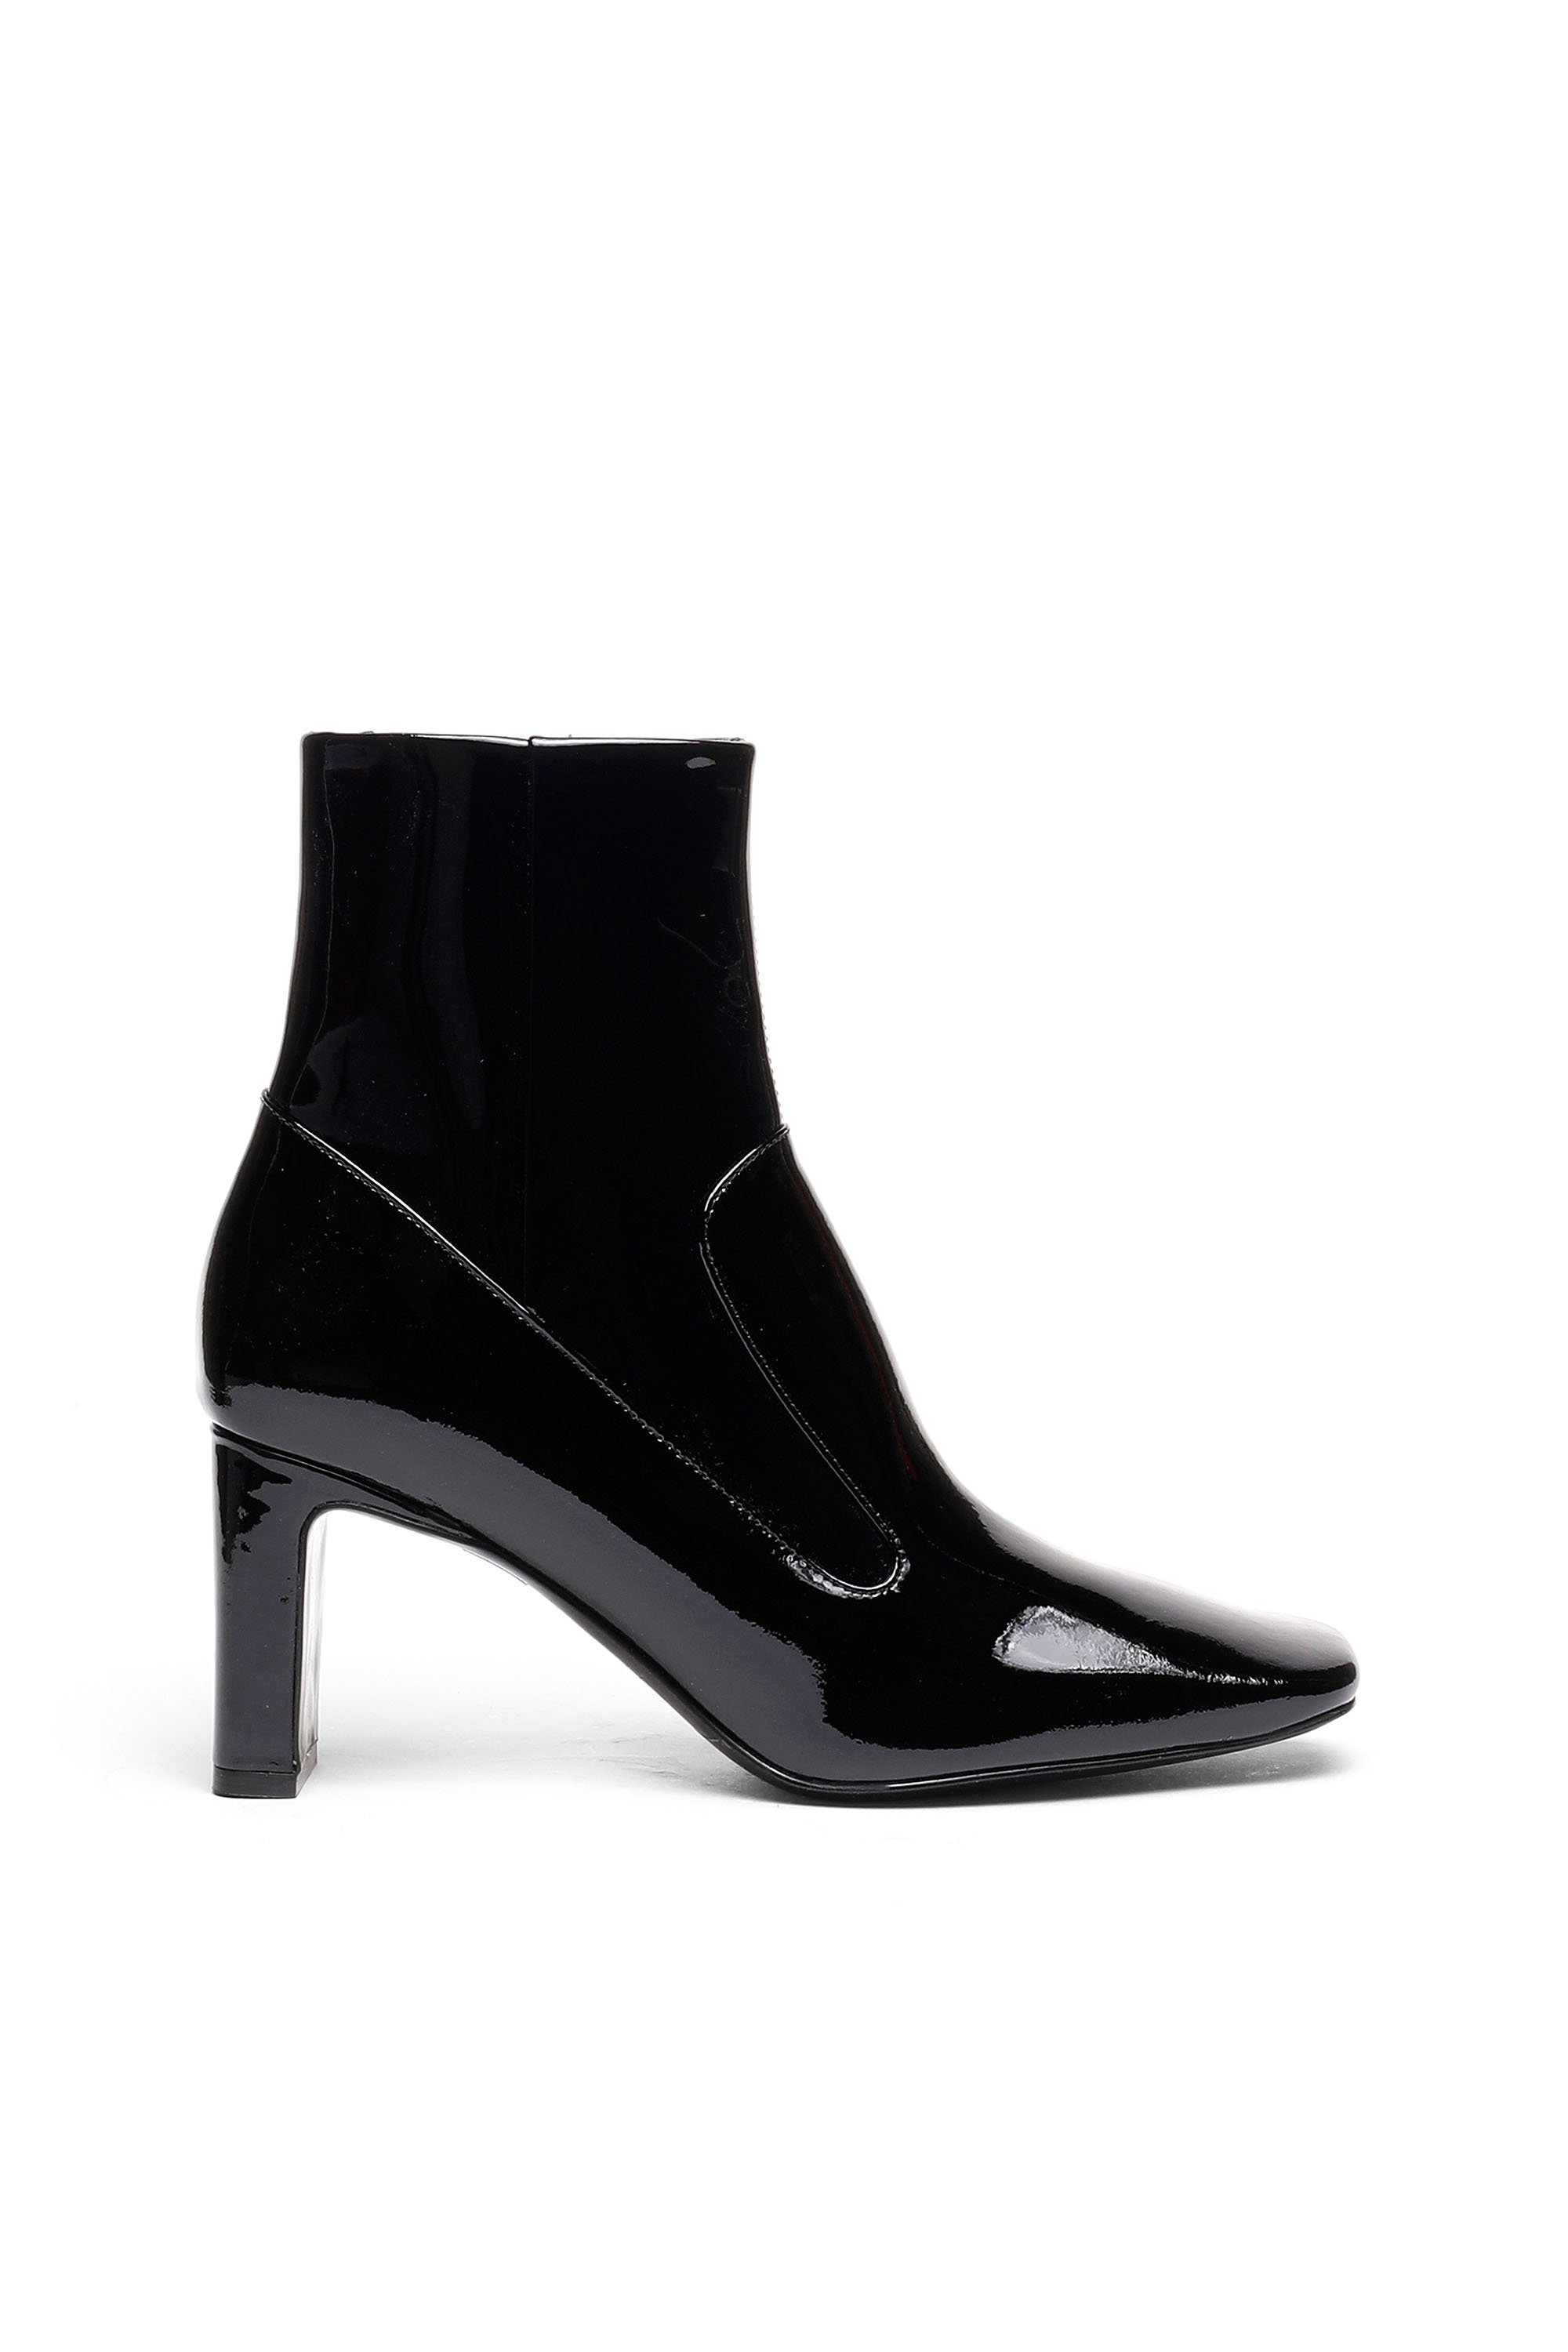 DIESEL ANKLE BOOTS IN PATENT LEATHER